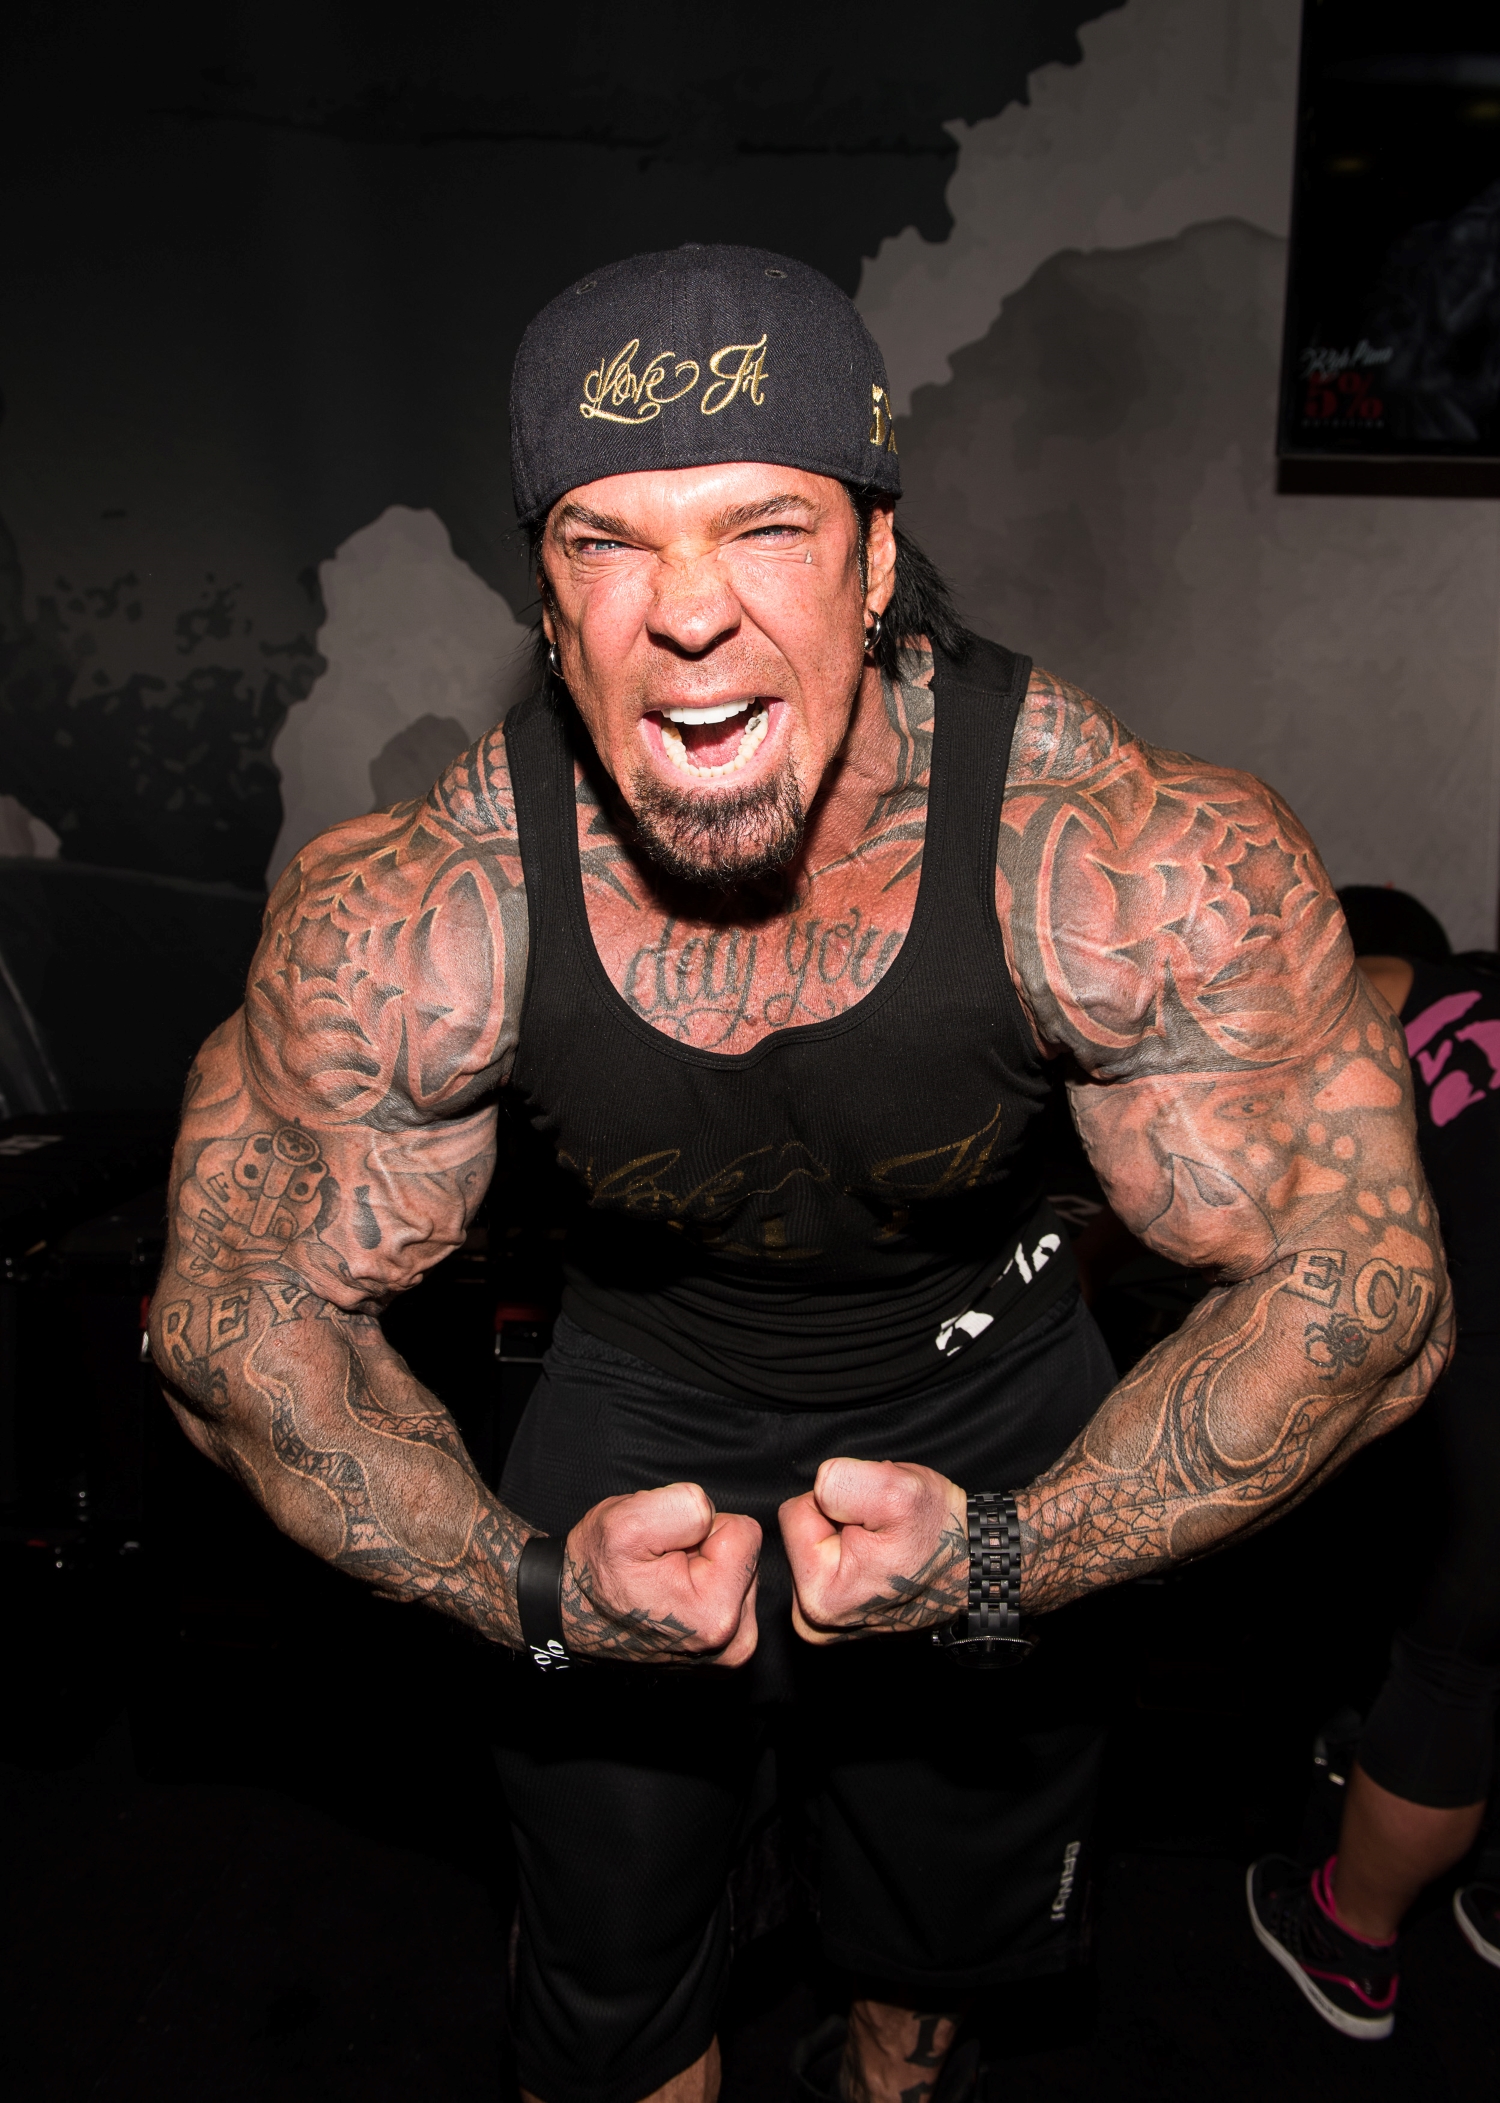 Beloved Bodybuilder and Longtime Admitted Steroid User Rich Piana Tragically Died After Collapsing During a Haircut in His Own Home